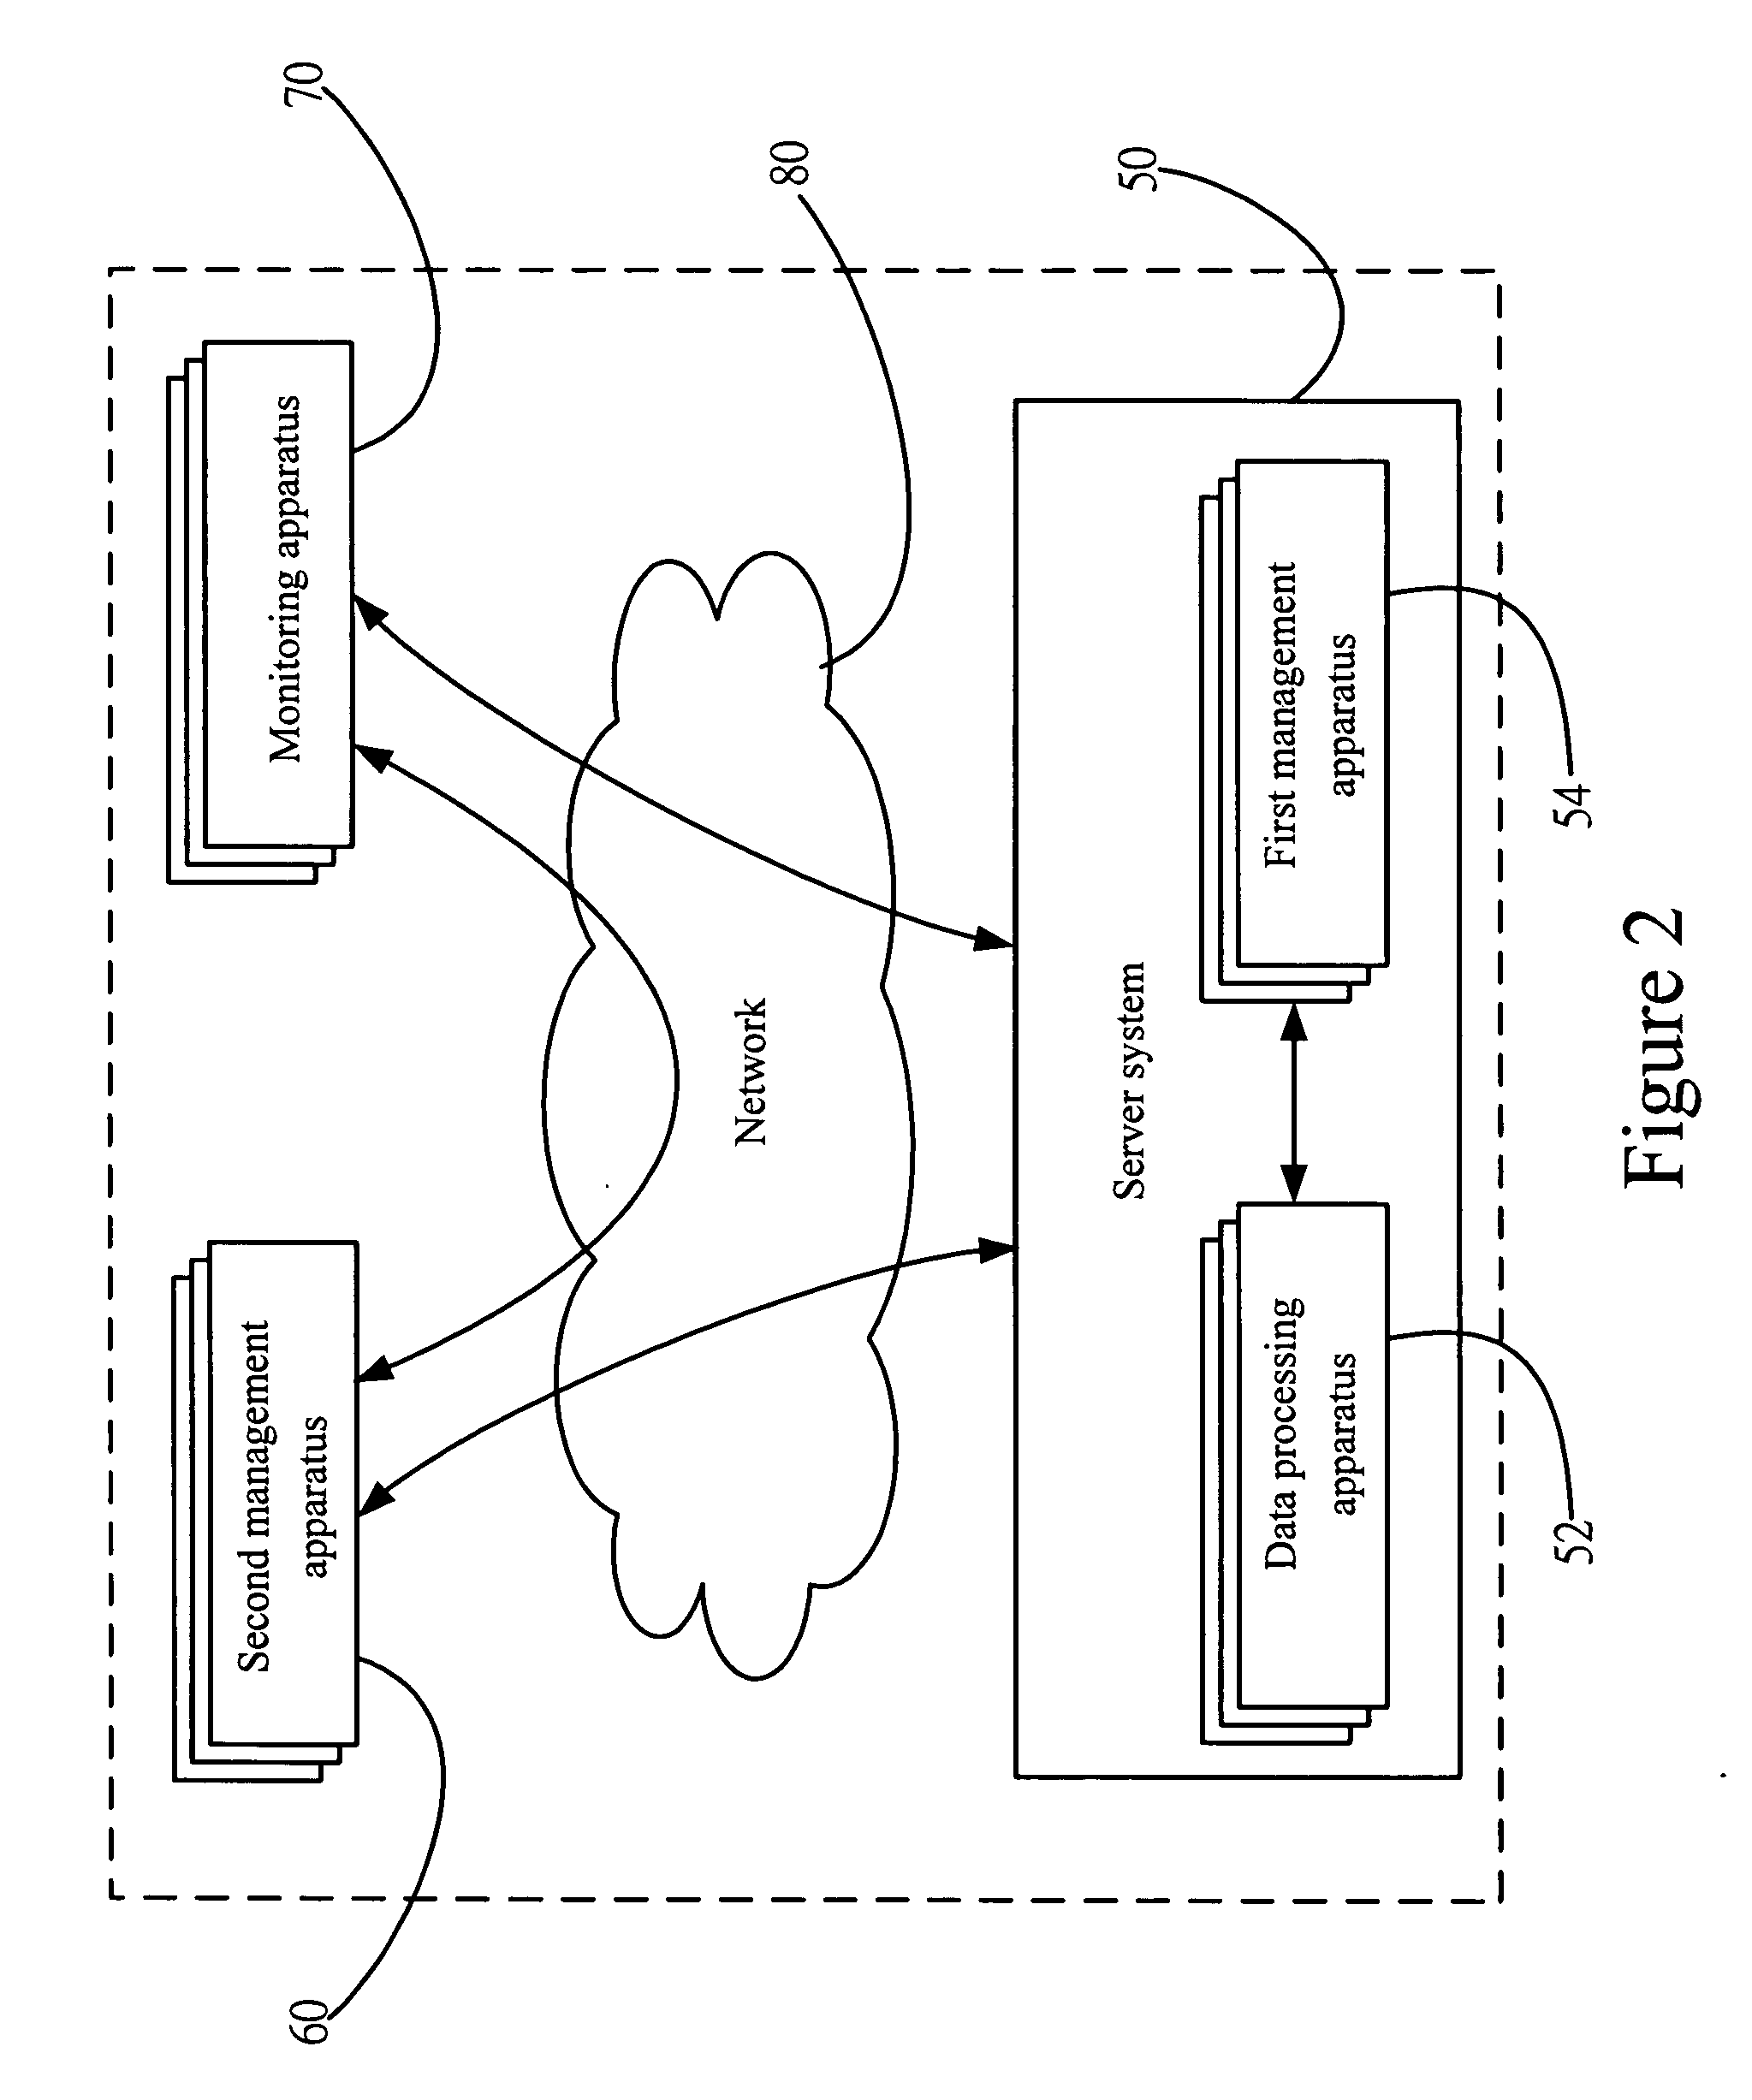 Management system with real-time interaction for enviromental monitoring and method thereof